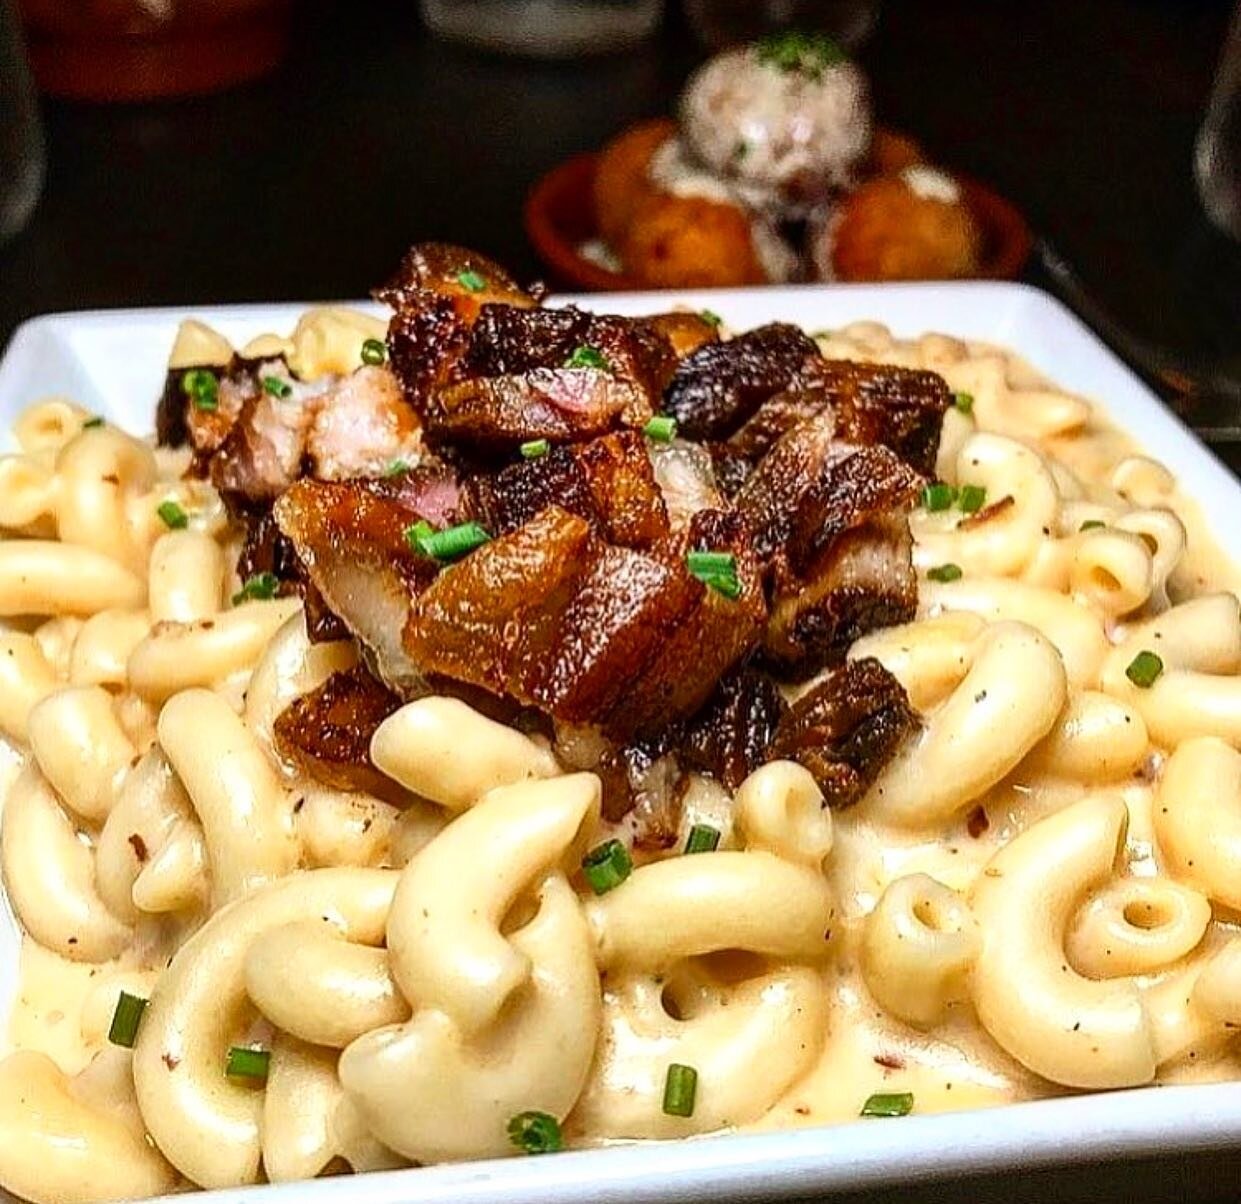 Giving away a year of free Smoked Gouda Mac and Cheese! All you have to do is subscribe to our email list. We will chose a winner at the end of summer! Cheers 👇🏼

https://www.tullulahs.com/subscribe
.
.
.
.
#freemacandcheese #smokedgoudamac #macand